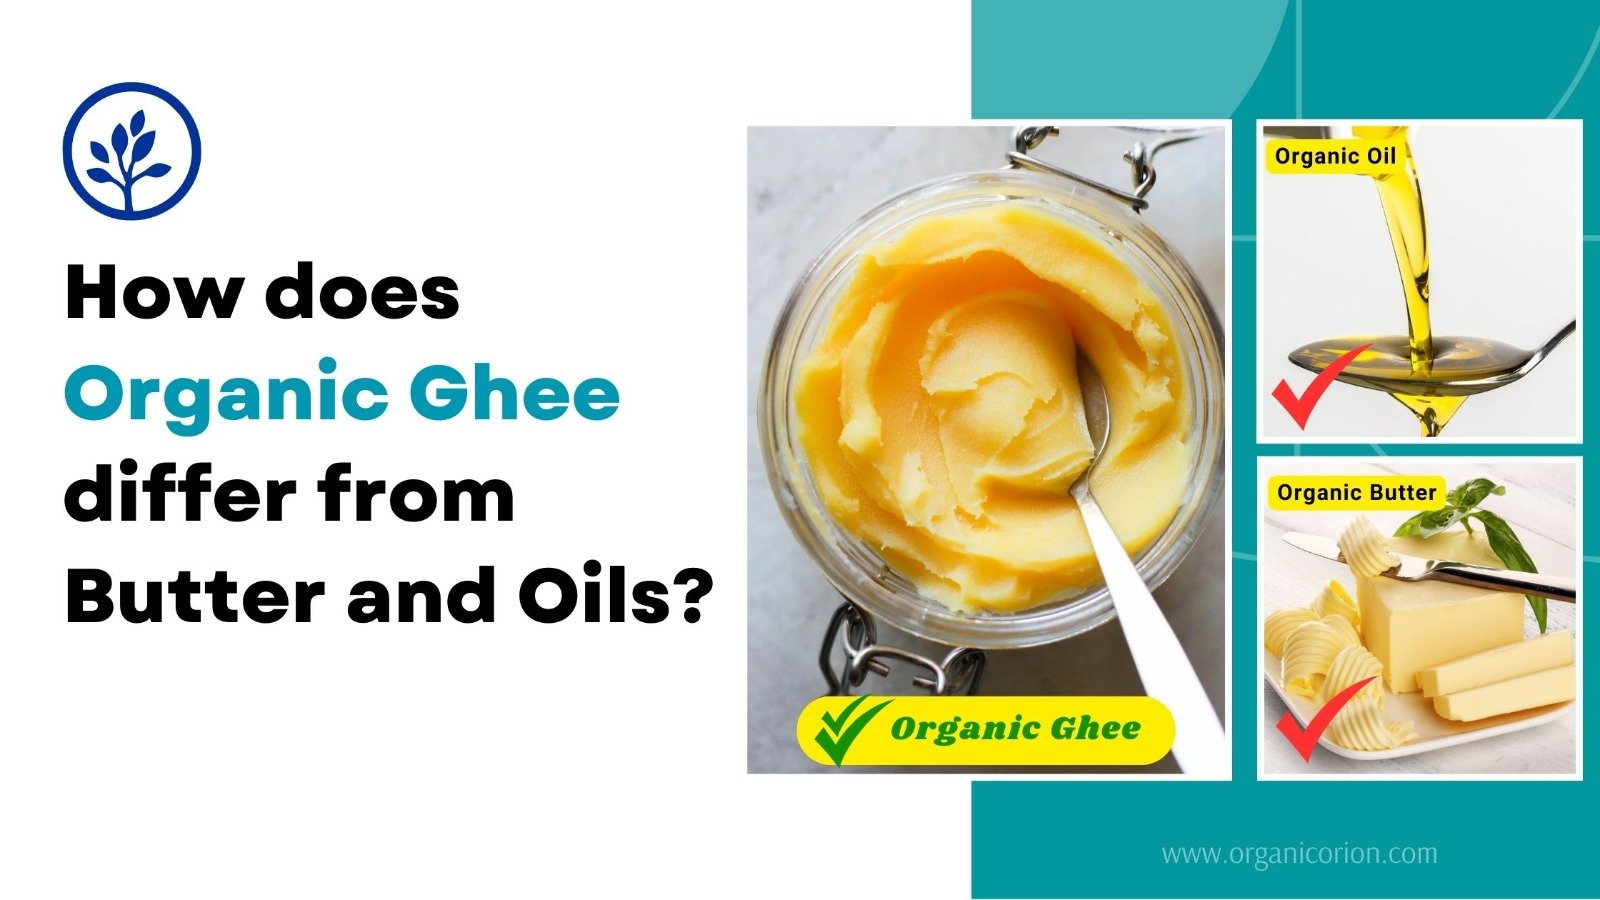 How does organic ghee differ from butter and oils